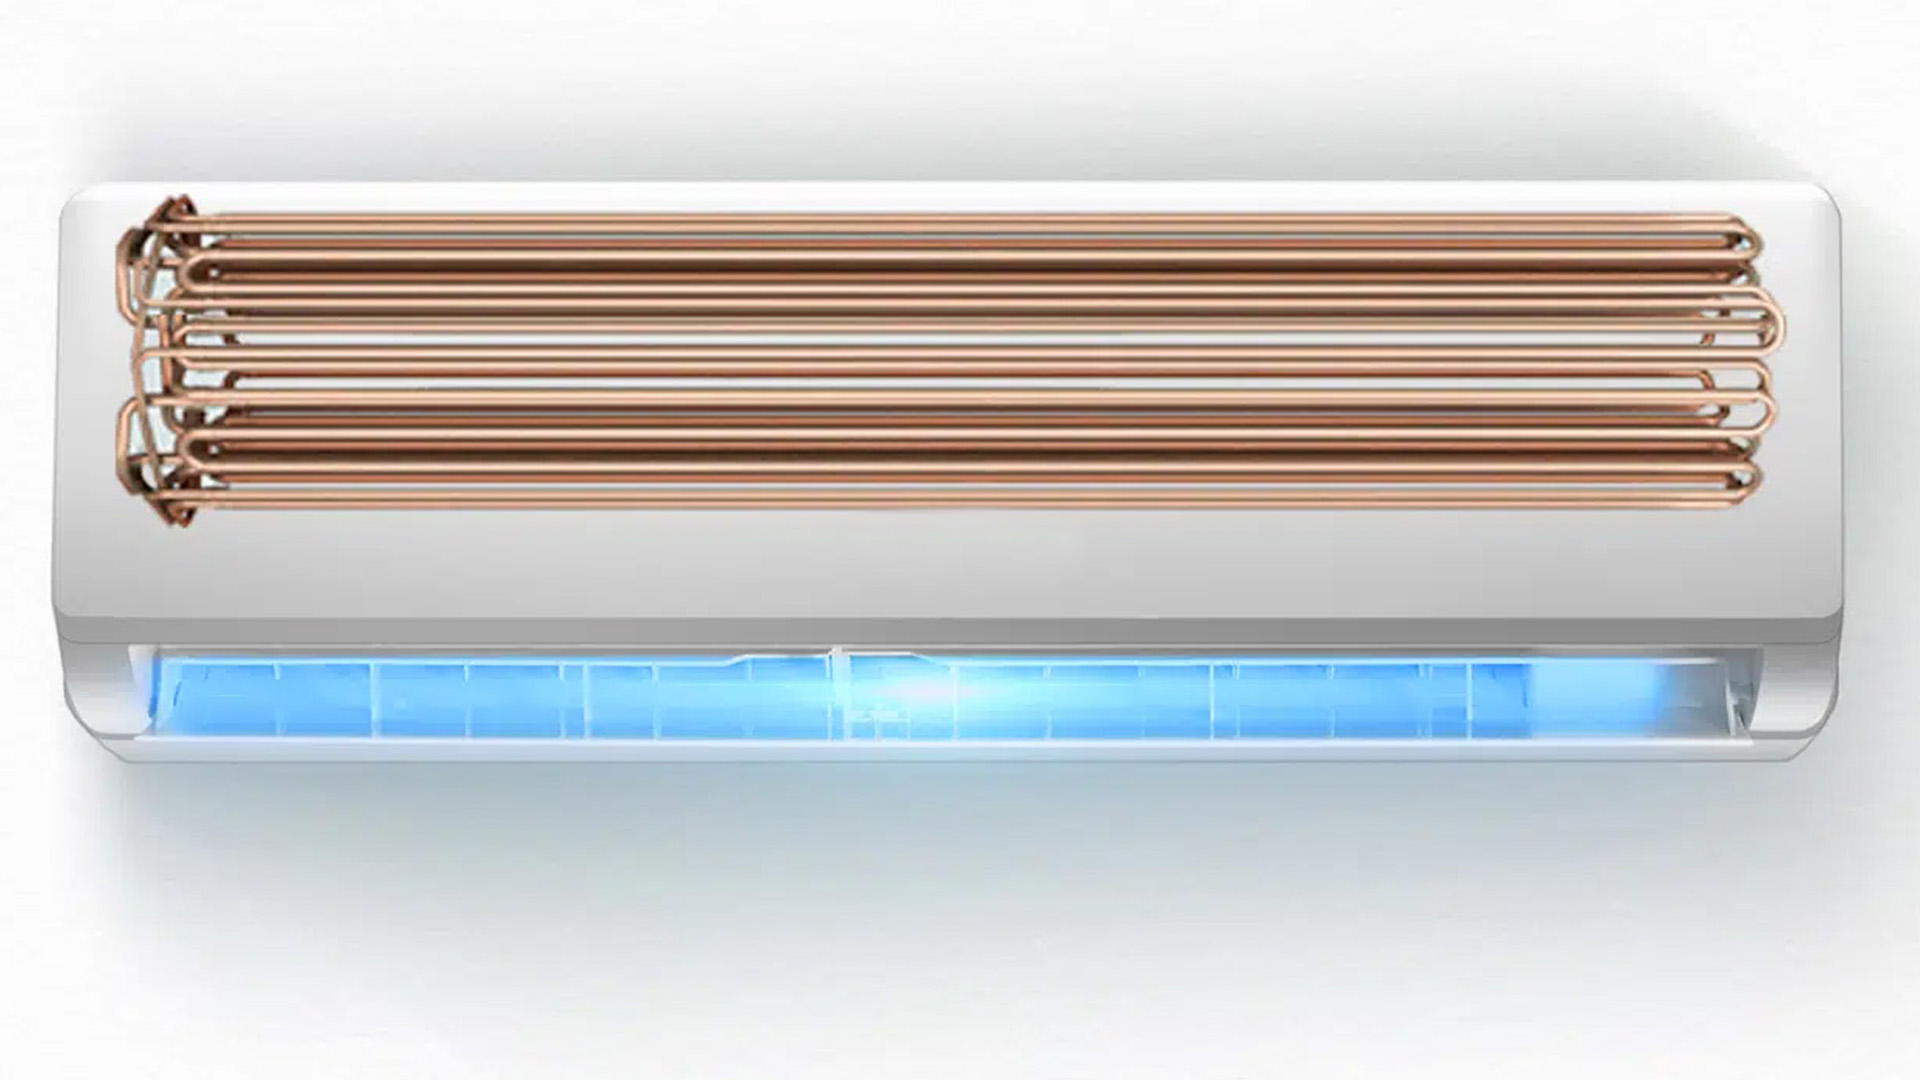 100% Copper Tubing Available in Turbo Air Conditioner